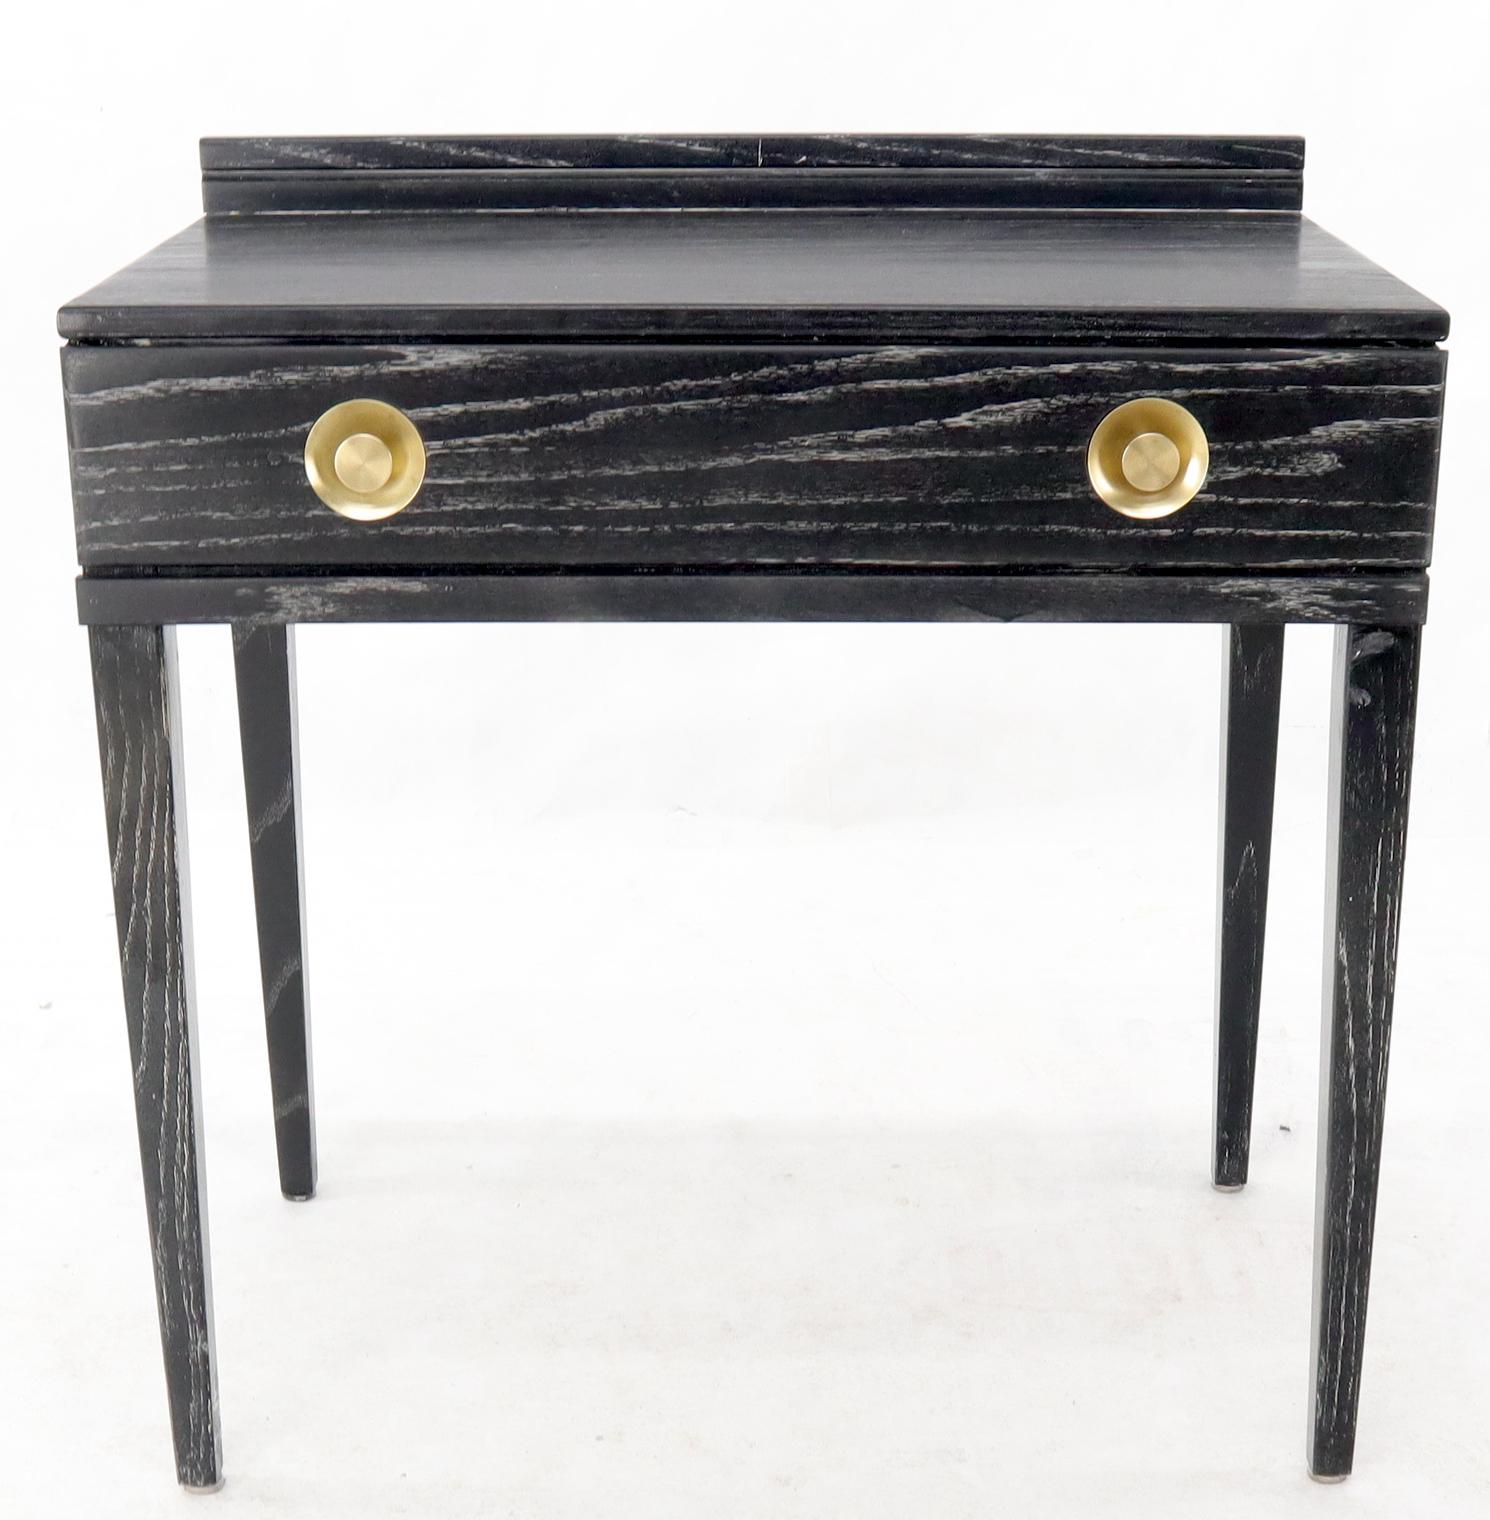 Mid-Century Modern cerused oak small petit desk writing table or console with round solid brass pulls.